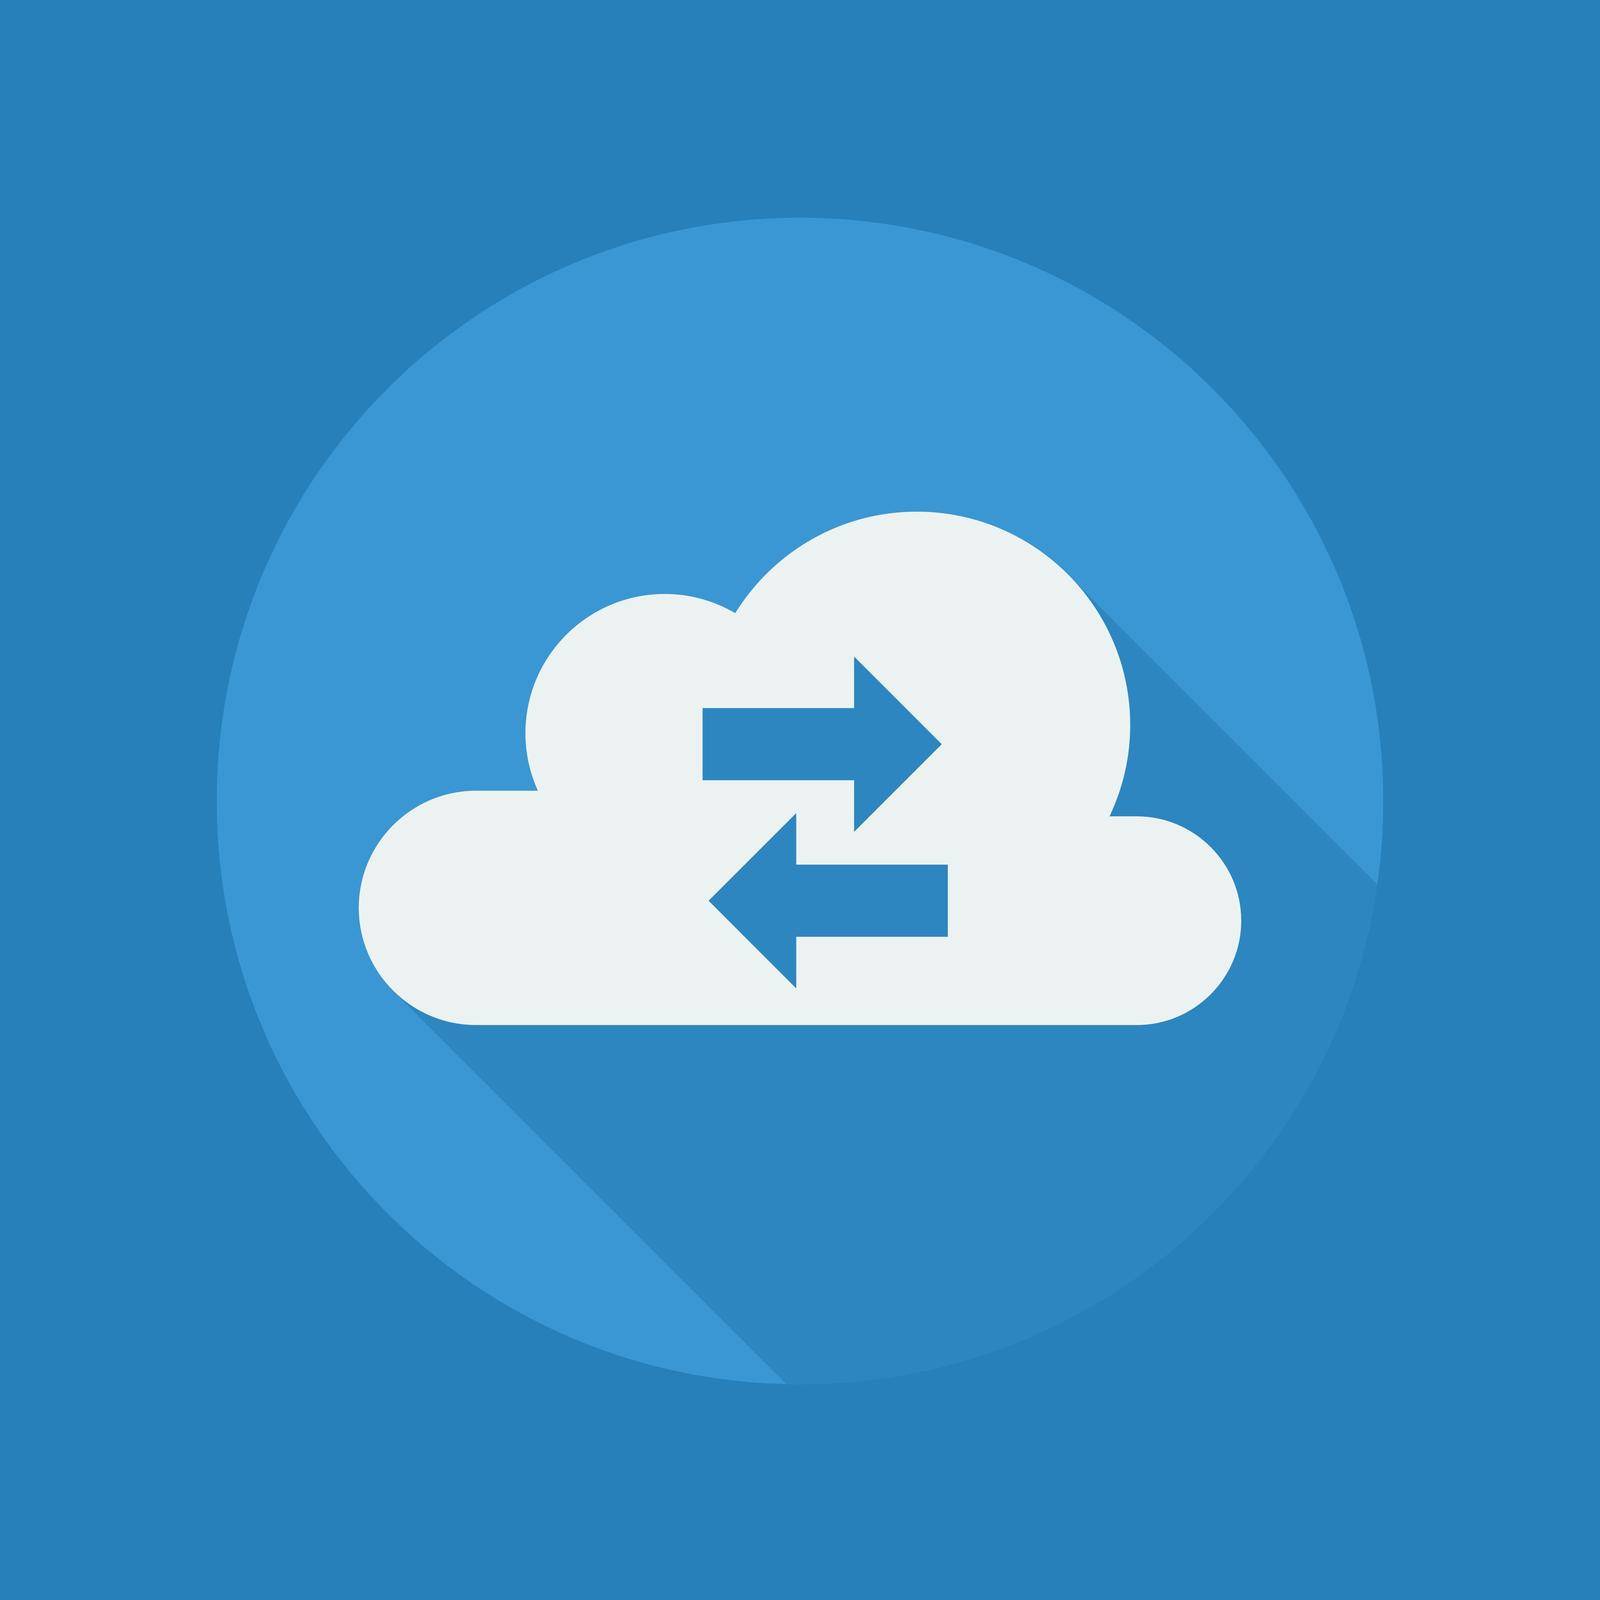 Cloud Computing Flat Icon With Long Shadow. Transfer